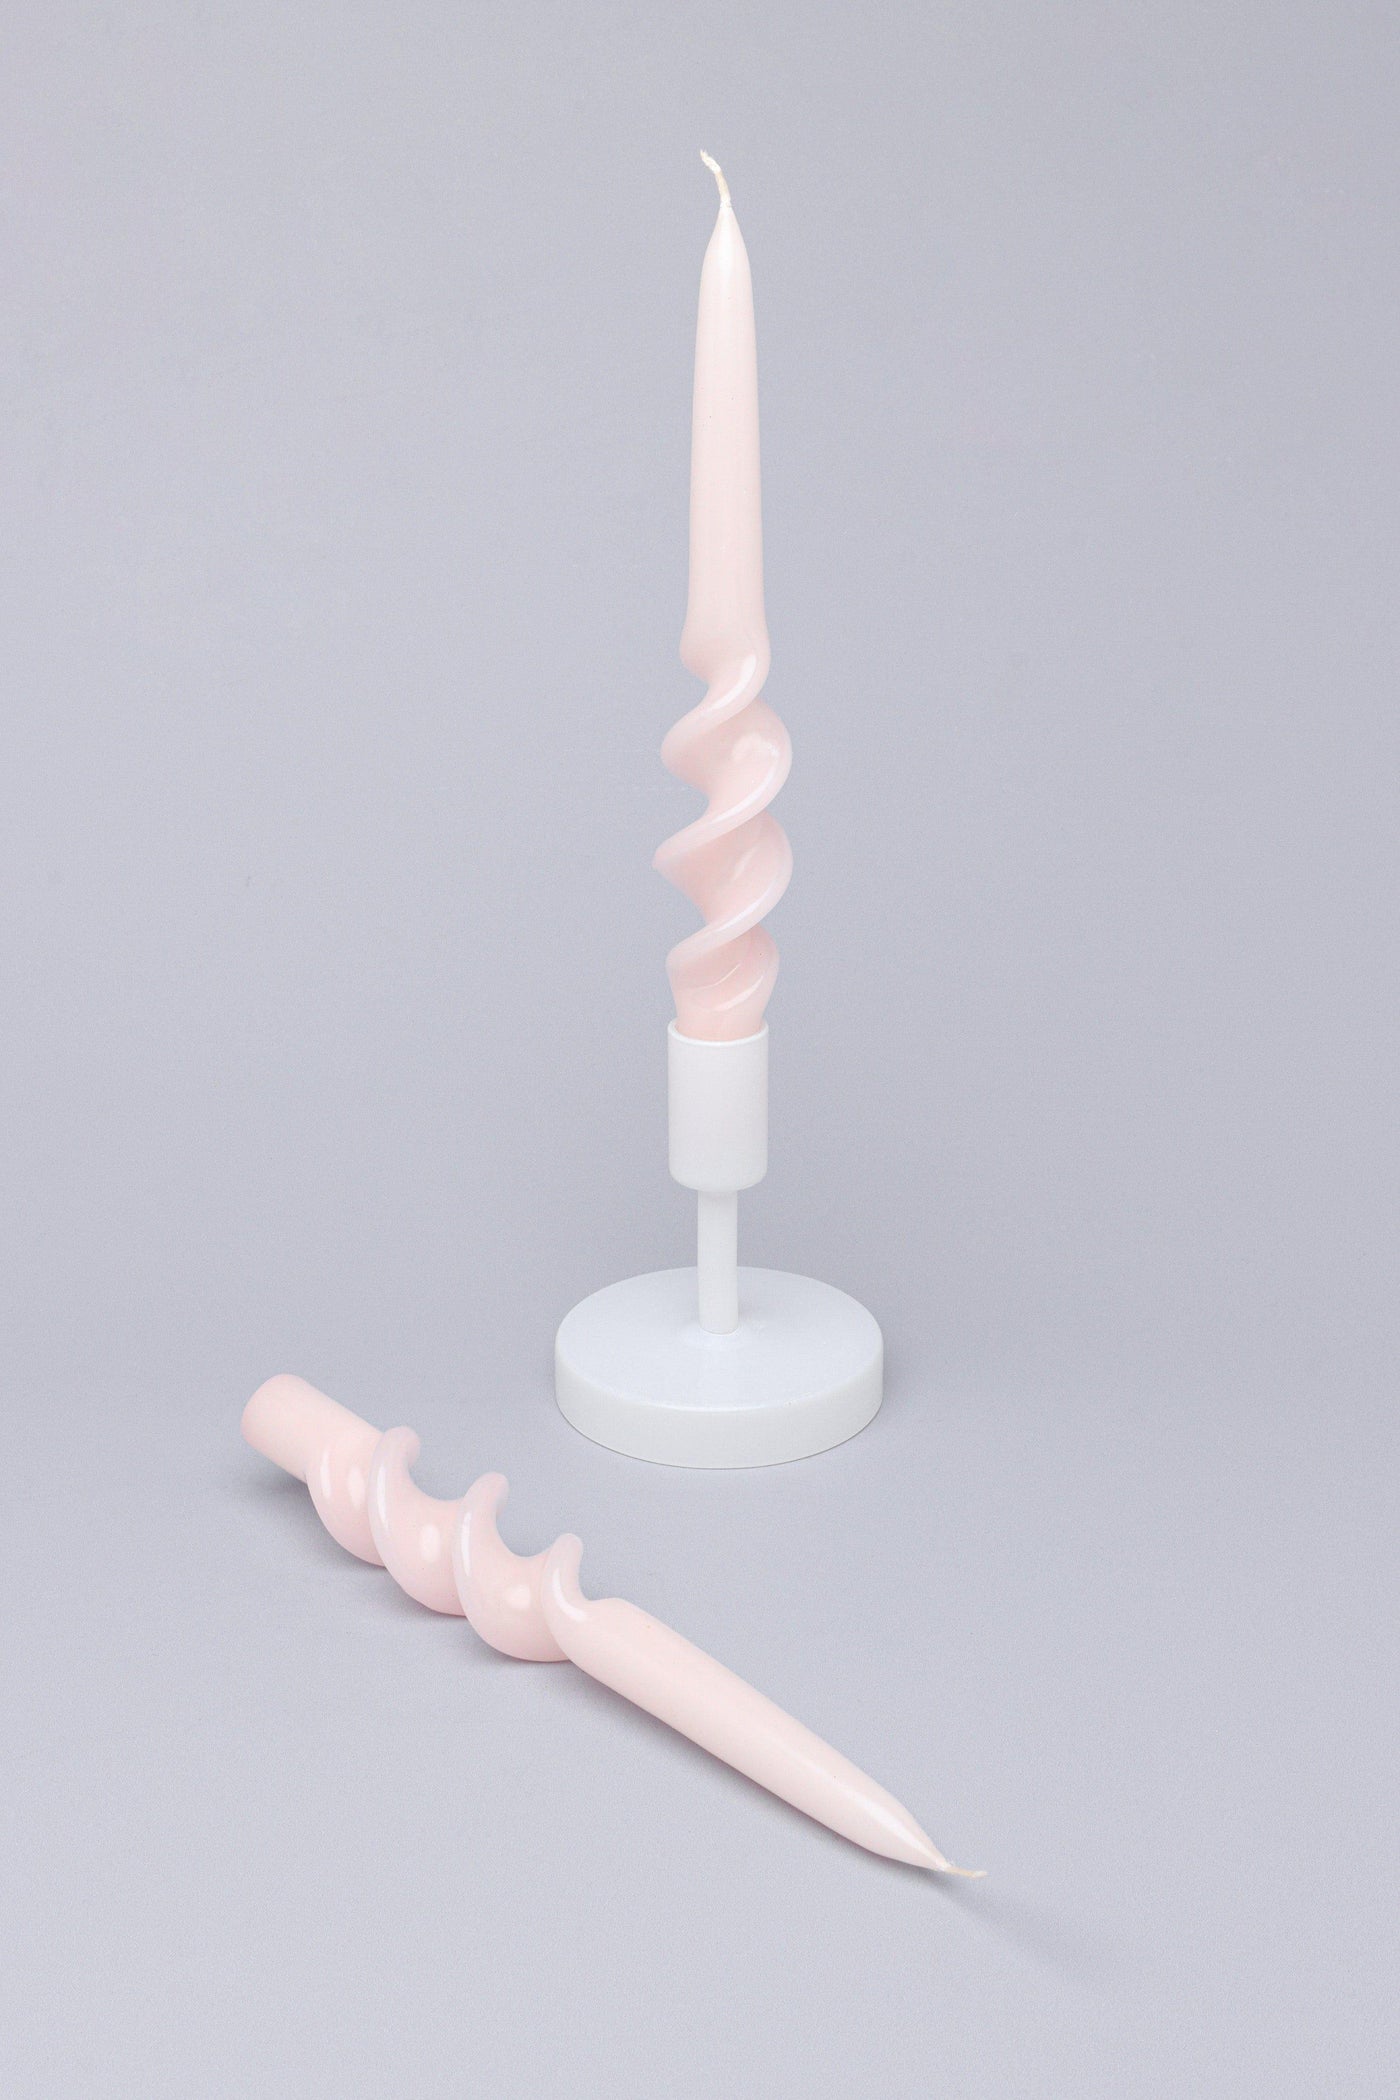 G Decor Candles Pink Set 2 Pastel Pink 9-inch Spiral Twisted Hand Dipped Candlesticks Taper Church Dinner Candles